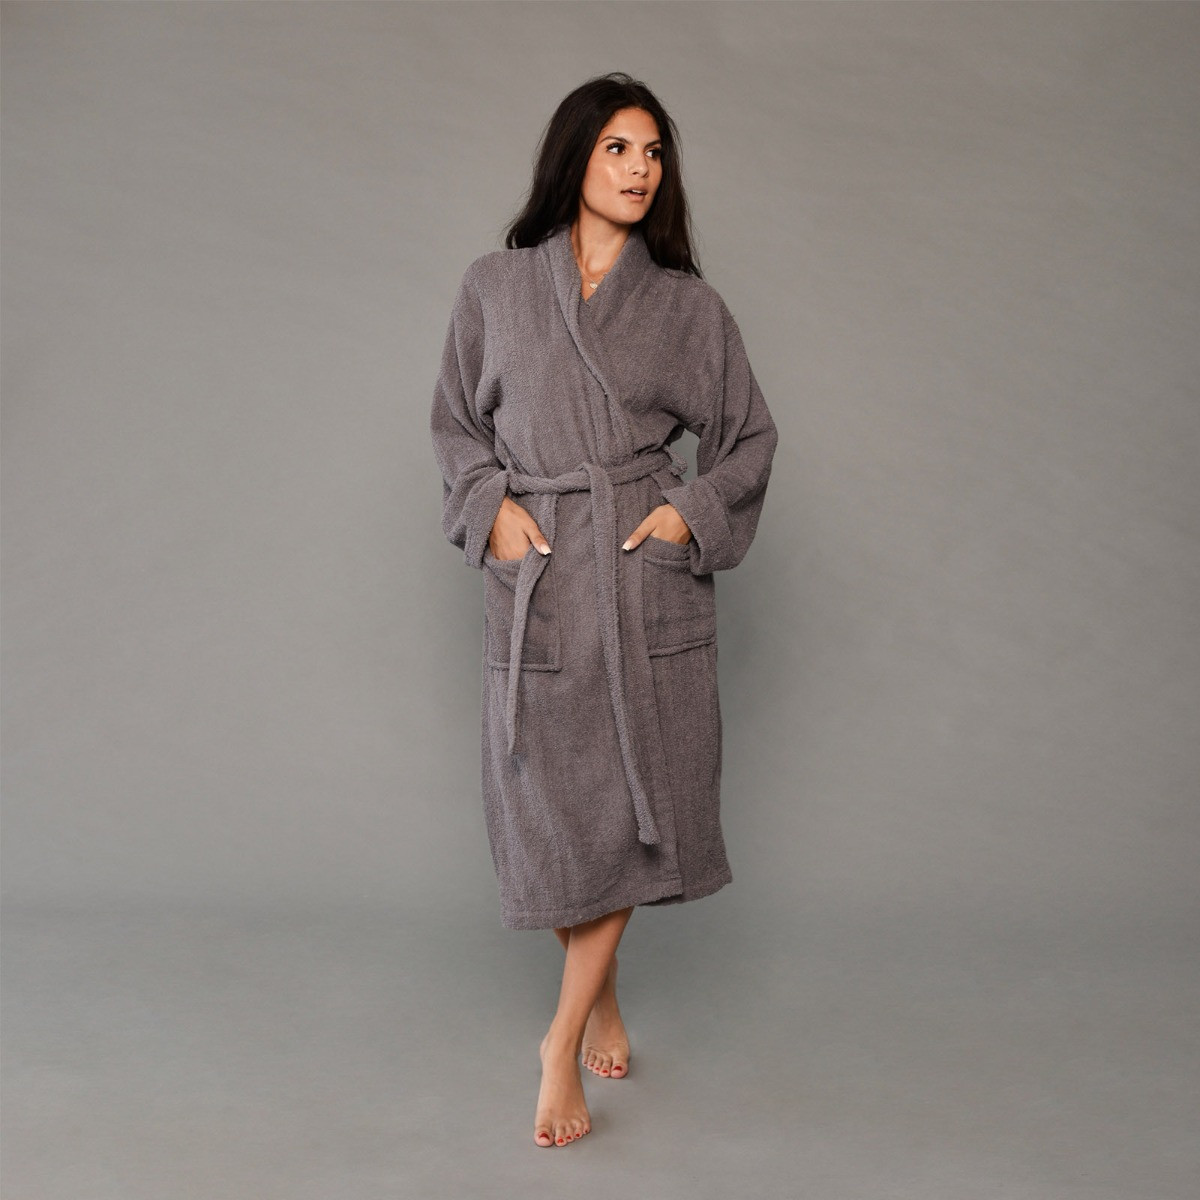 Brentfords 100% Cotton Towelling Dressing Gown, Adults - Charcoal Grey>